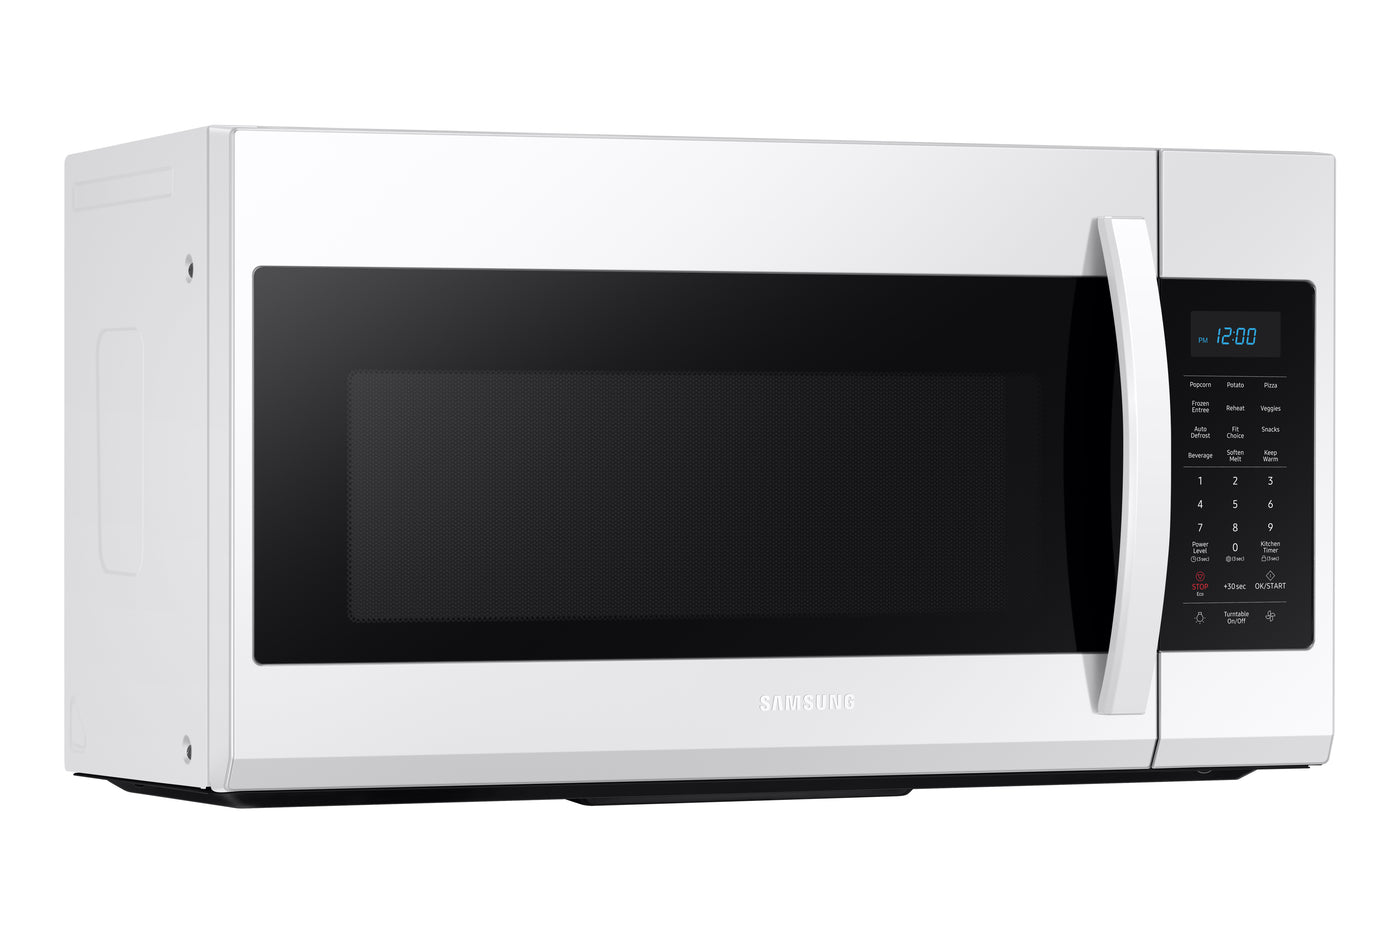 Samsung White Over-the-Range Microwave (1.9 Cu. Ft.) - ME19R7041FW